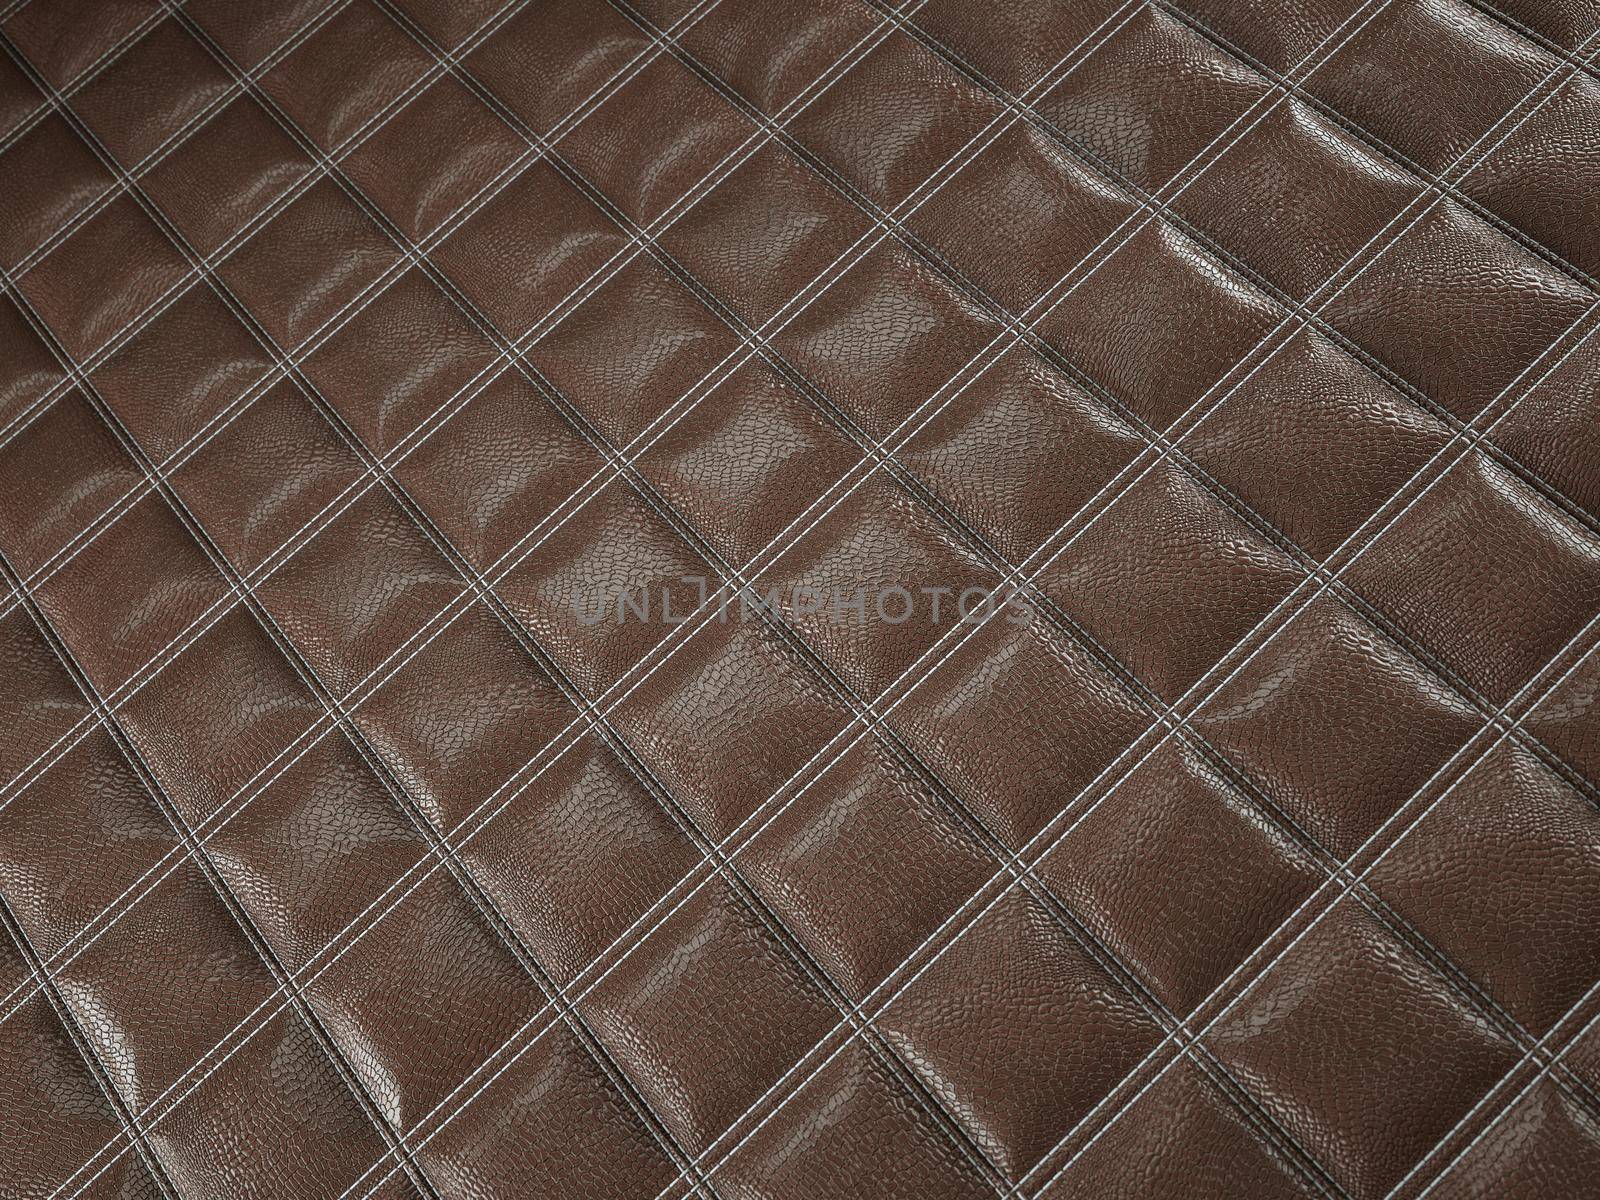 Alligator or crocodile brown Leather. Square stitched texture or background with bumps. 3d render, 3d illustration